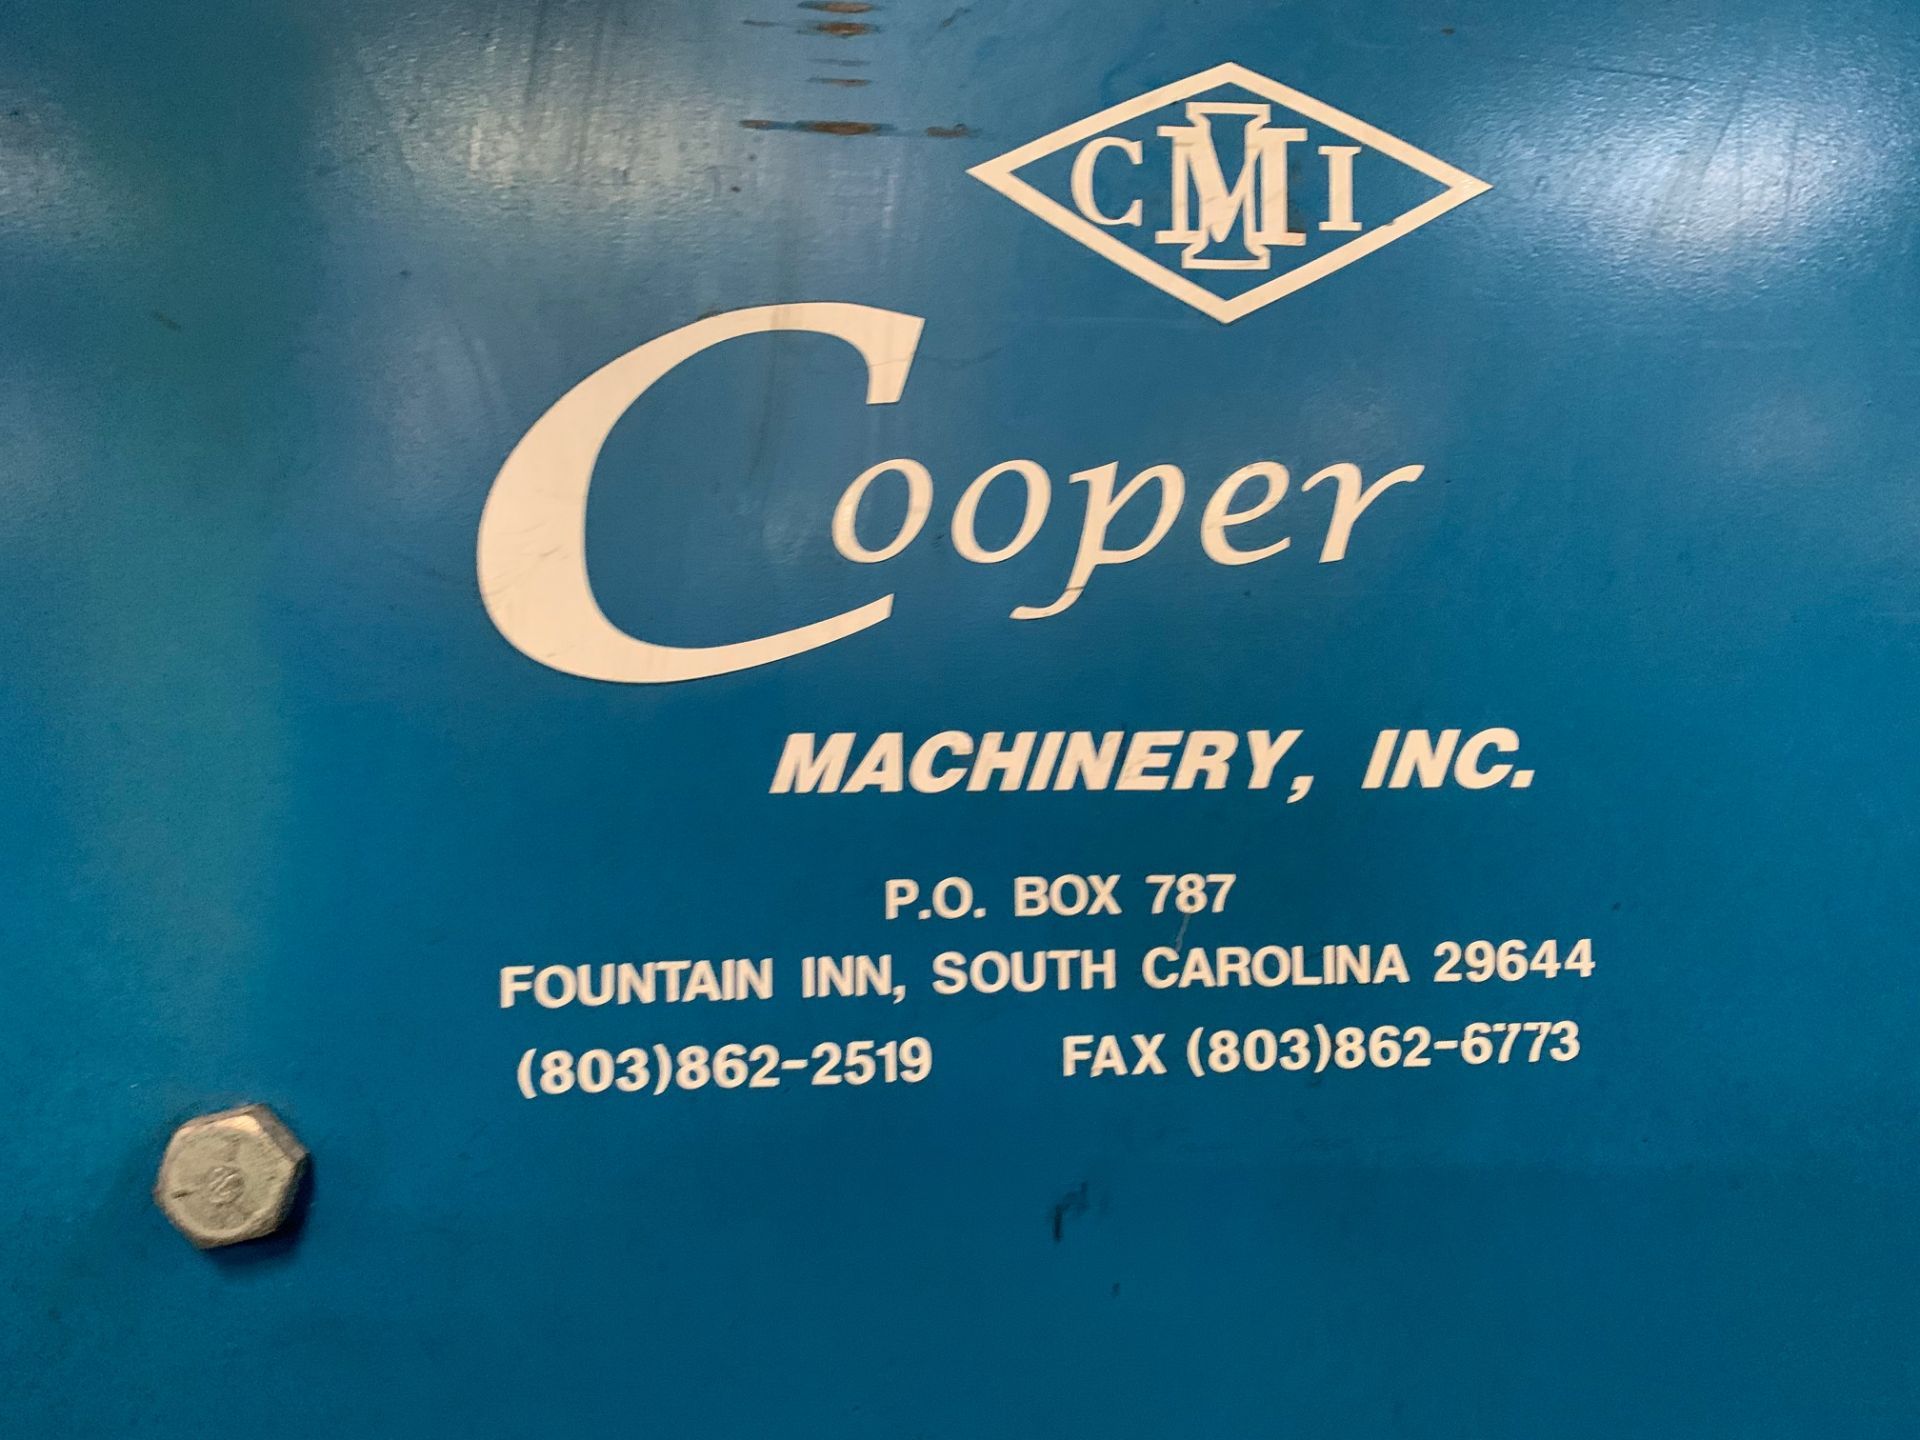 Cooper Inspection Machine, Working Width 130", Good Condition, Rigging Fee $150 - Image 7 of 7